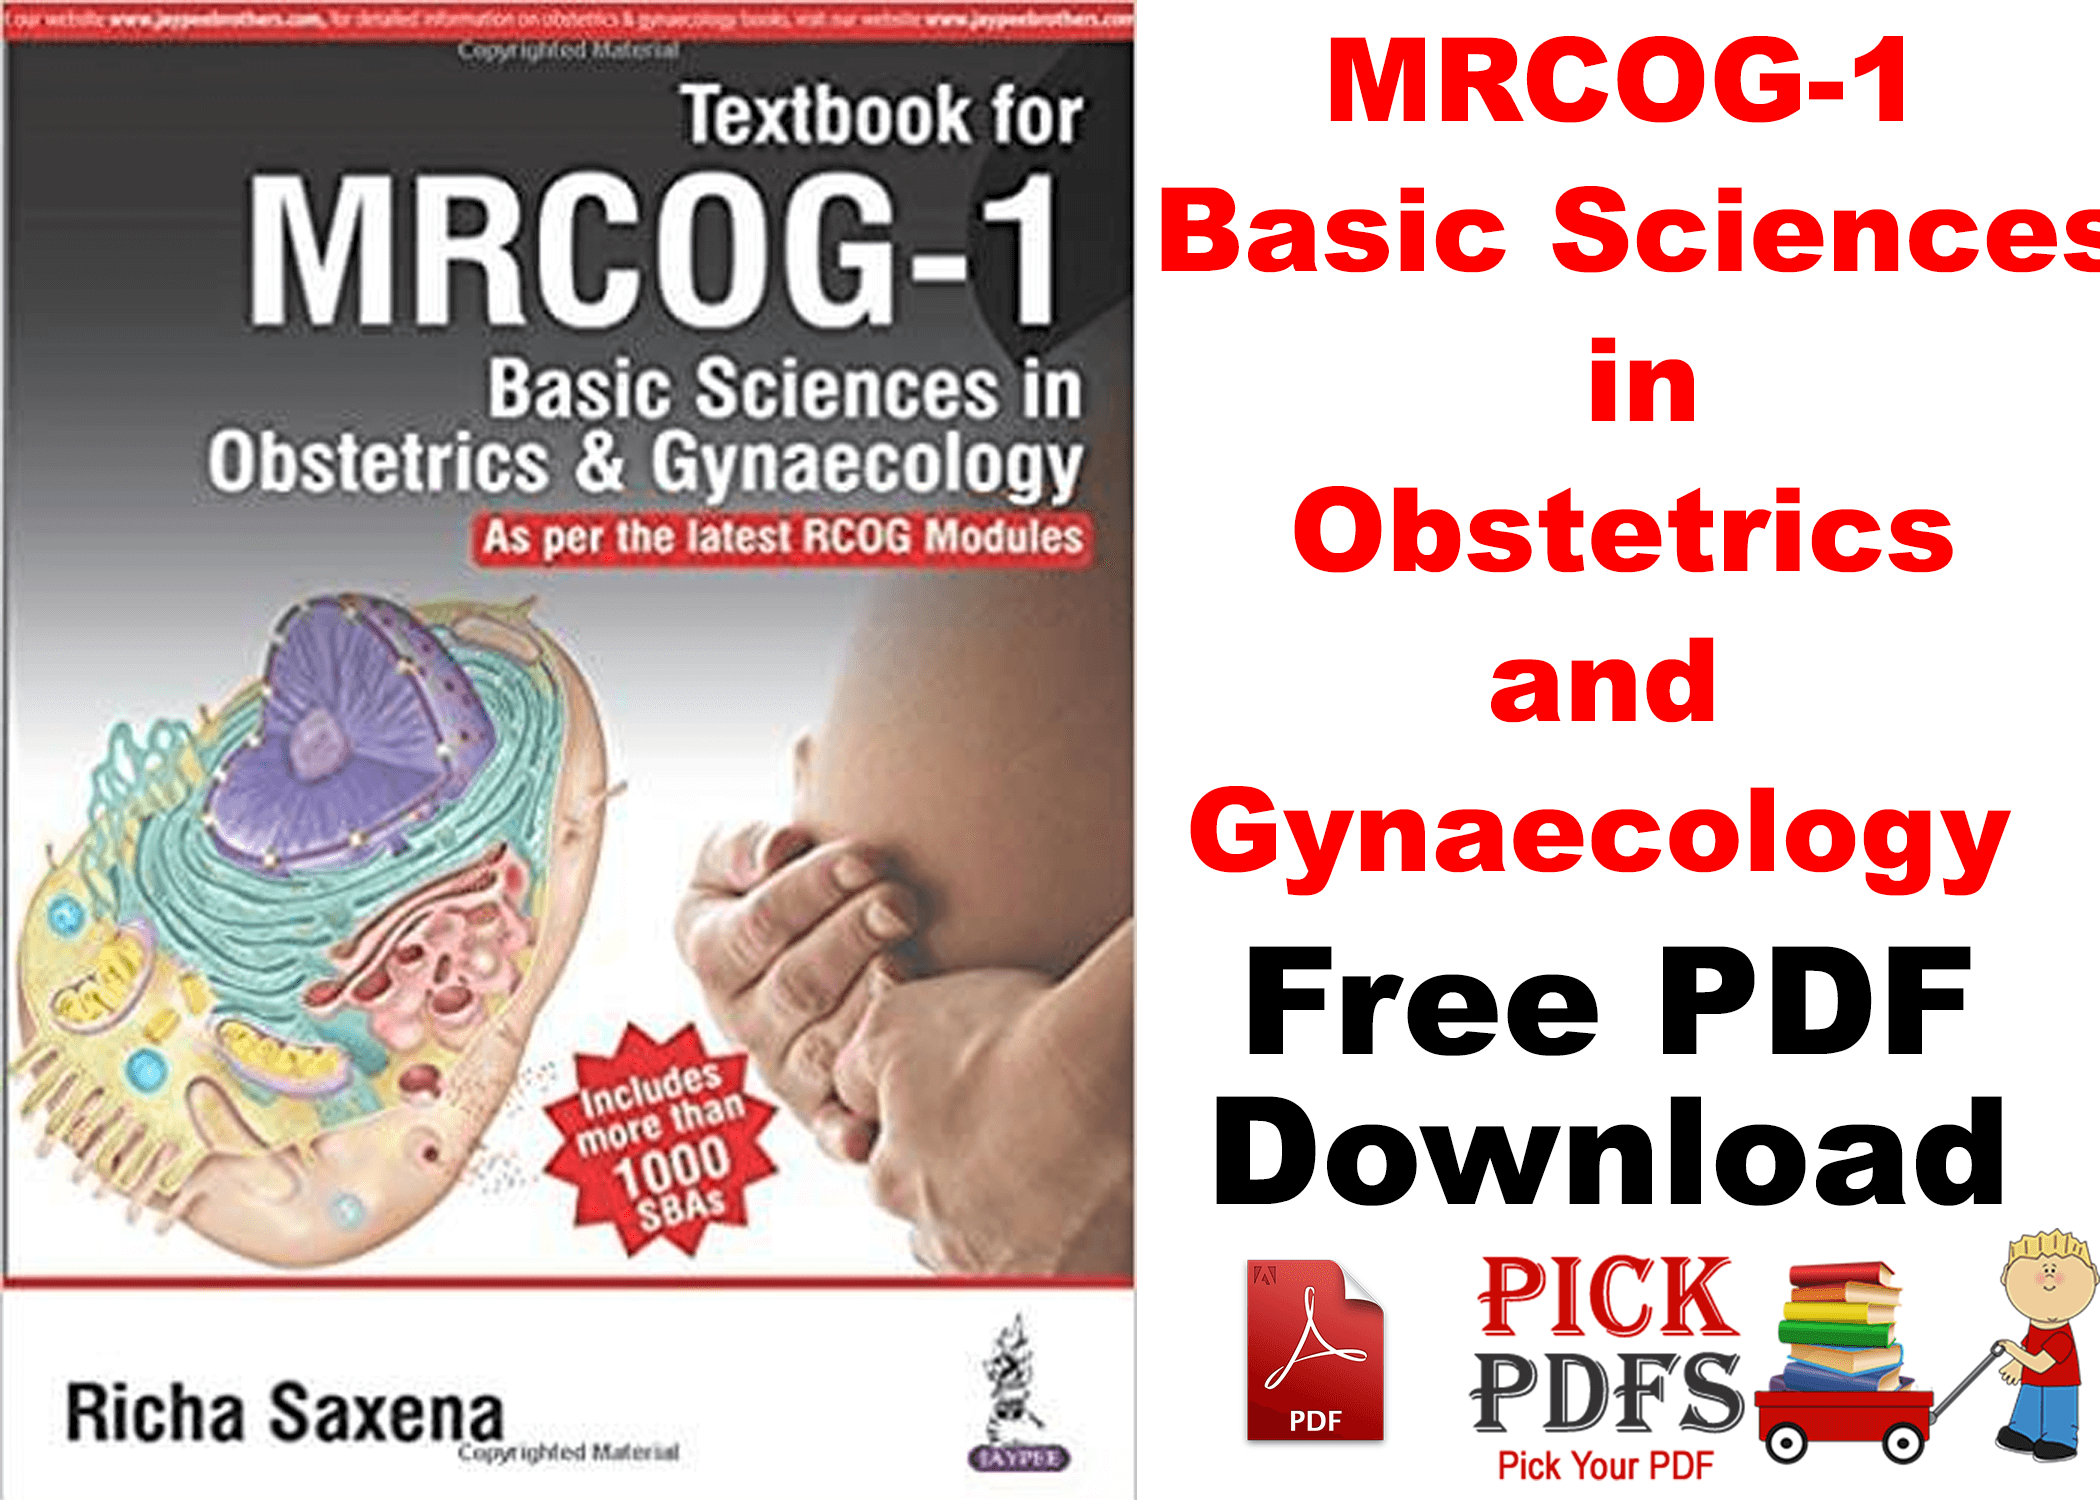 https://pickpdfs.com/download-obstetrics-and-gynecology-at-a-glance-pdf-free/